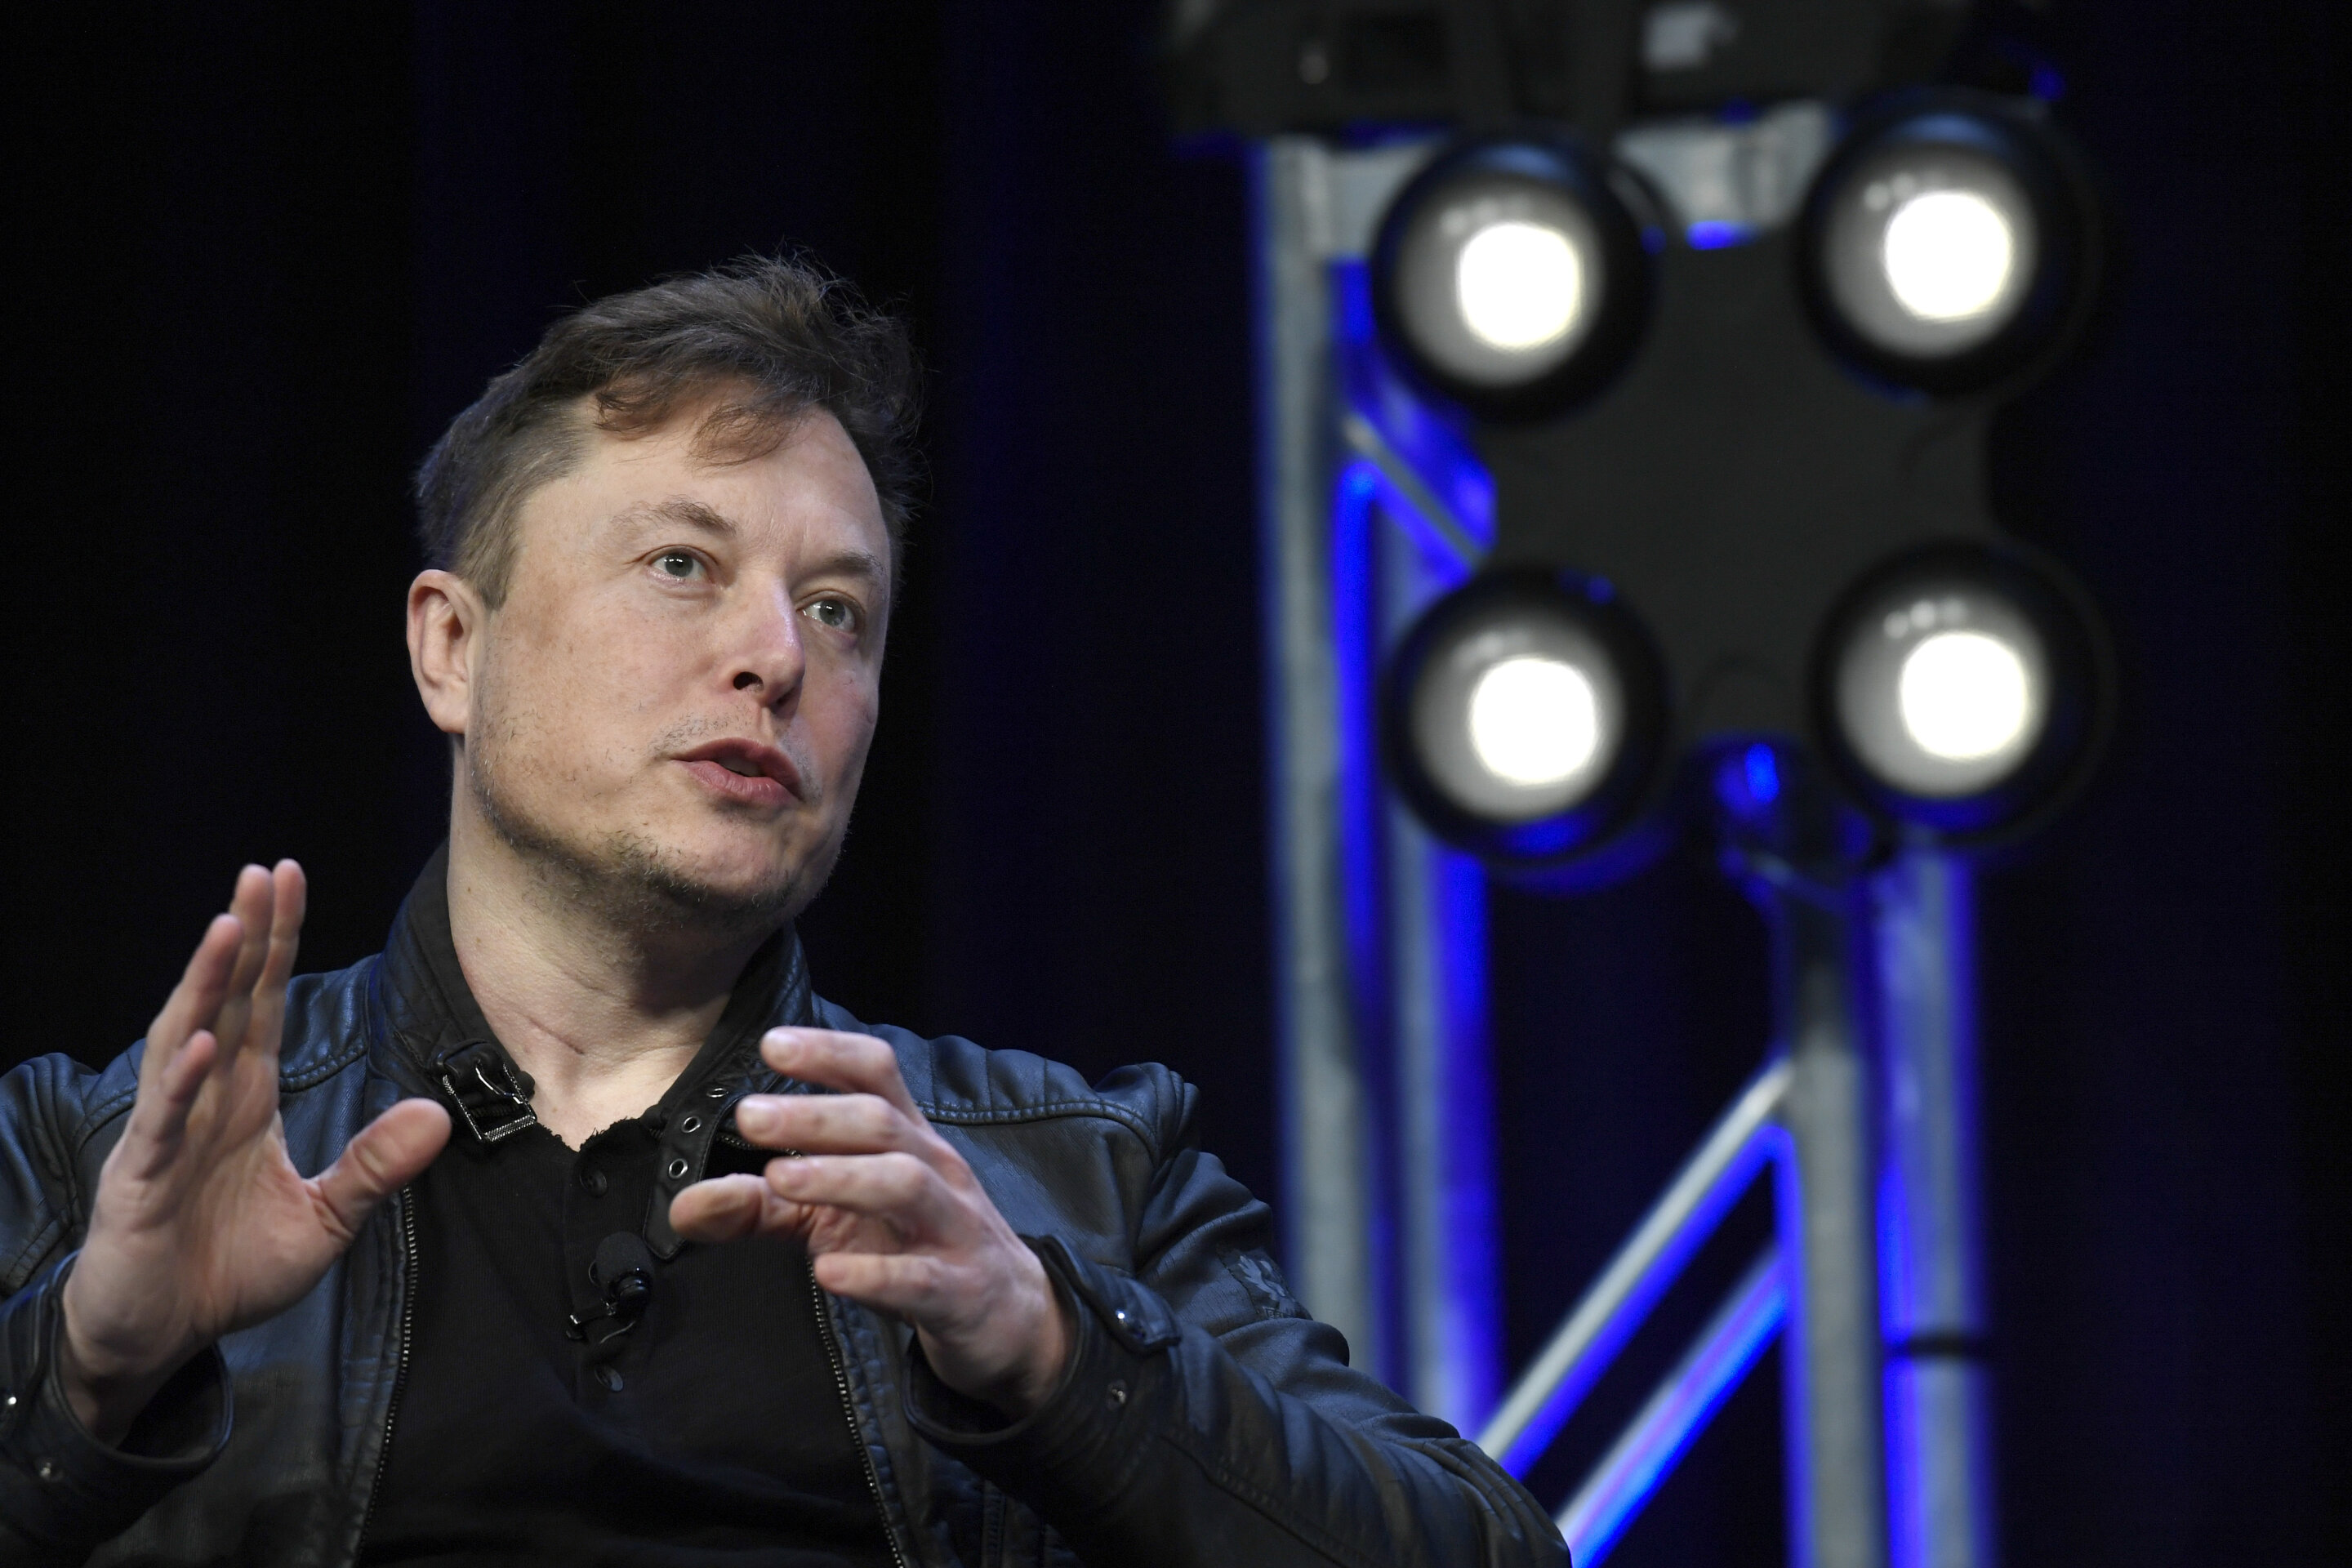 #SEC says it’s not violating Elon Musk’s right to free speech